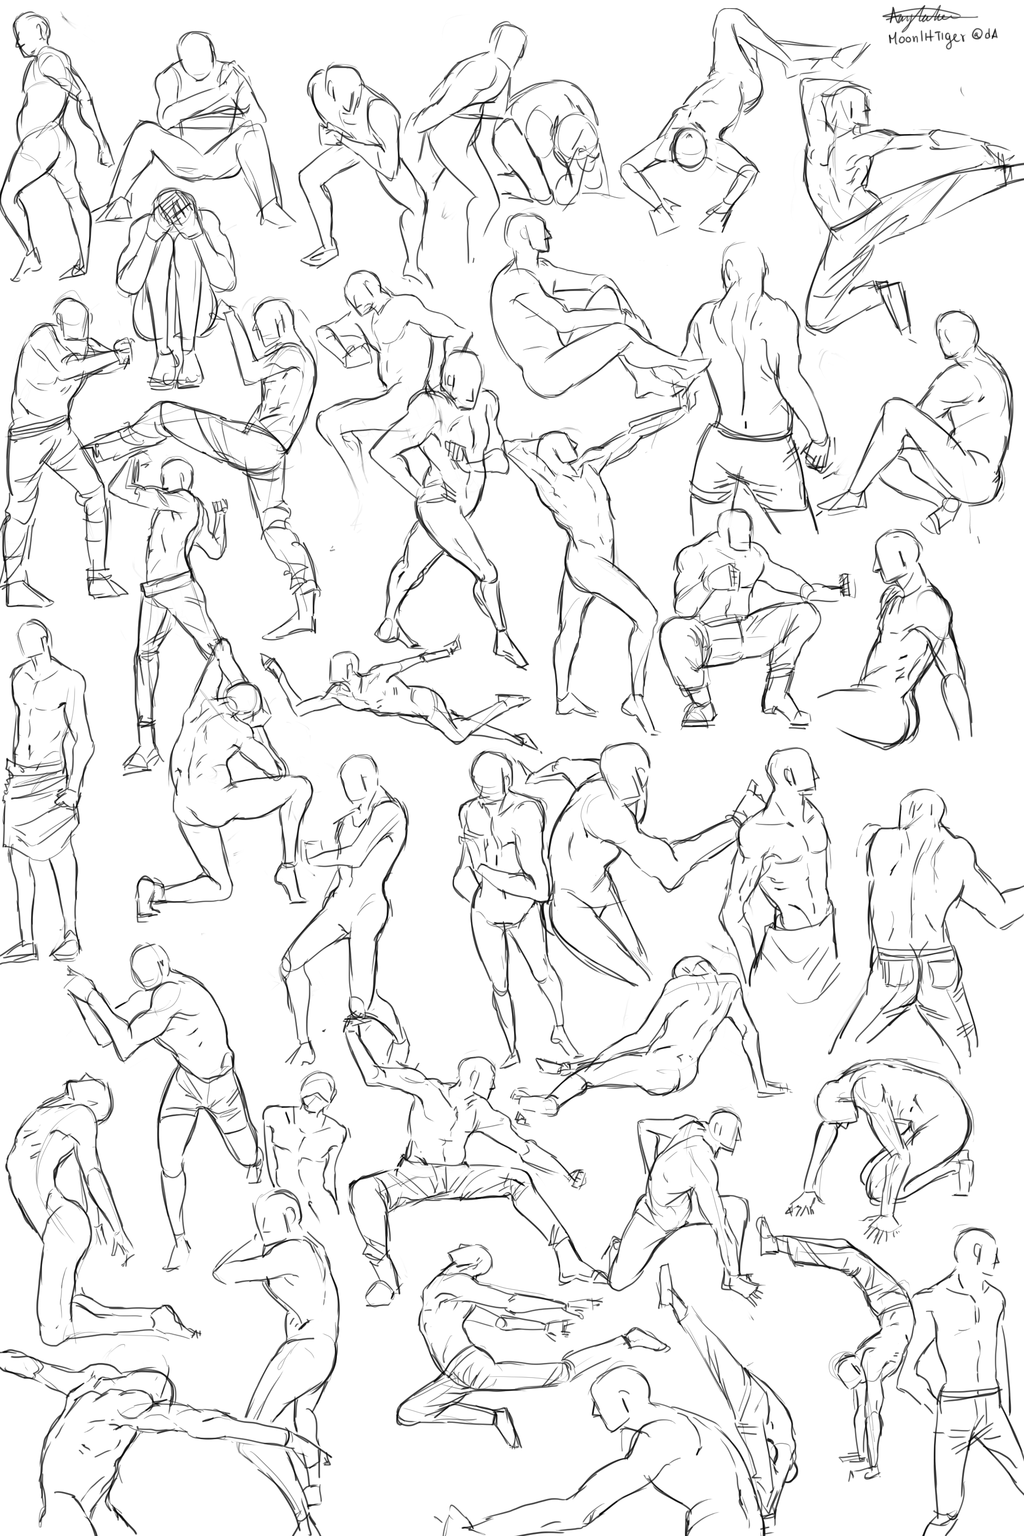 Art of Movement: 15 Powerful Male Poses for Dynamic Drawings - Artsydee -  Drawing, Painting, Craft & Creativity